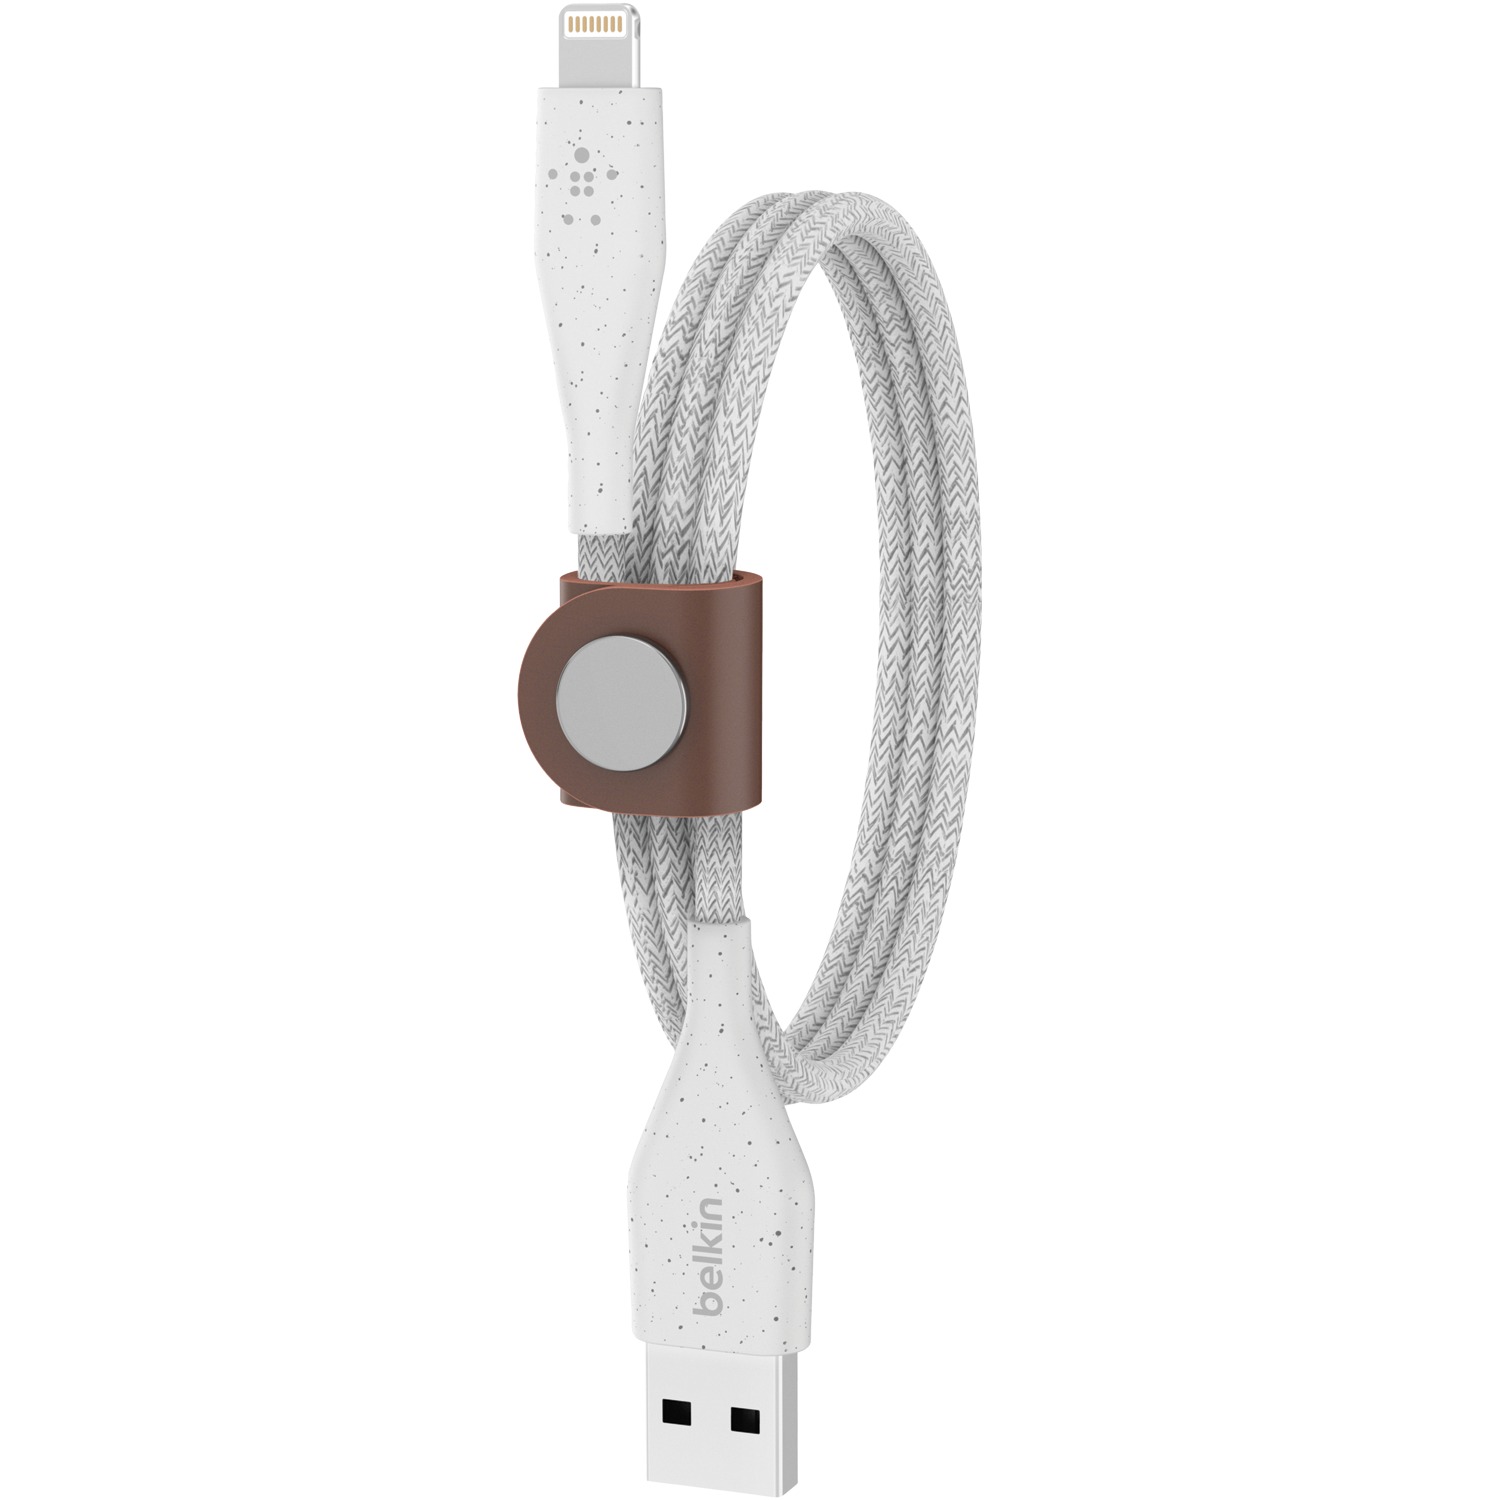 Belkin F8J236bt04-WHT DuraTek Plus Lightning to USB-A Cable, 4 Feet (White) - image 3 of 9